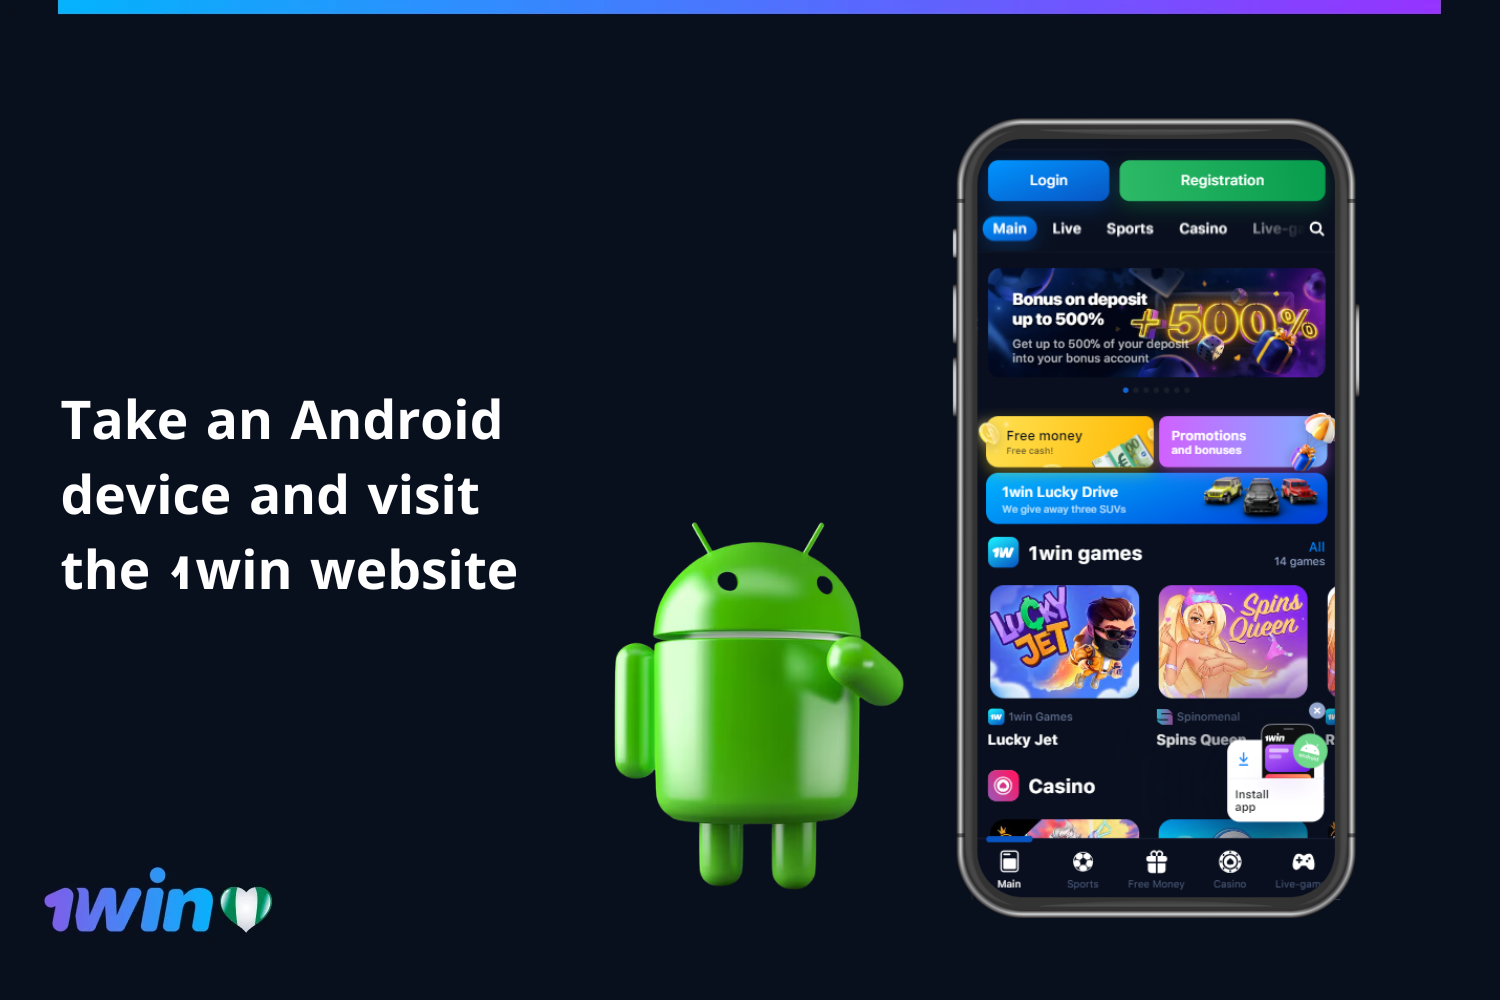 To download the application to your Android device, users from Nigeria should visit the 1Win website